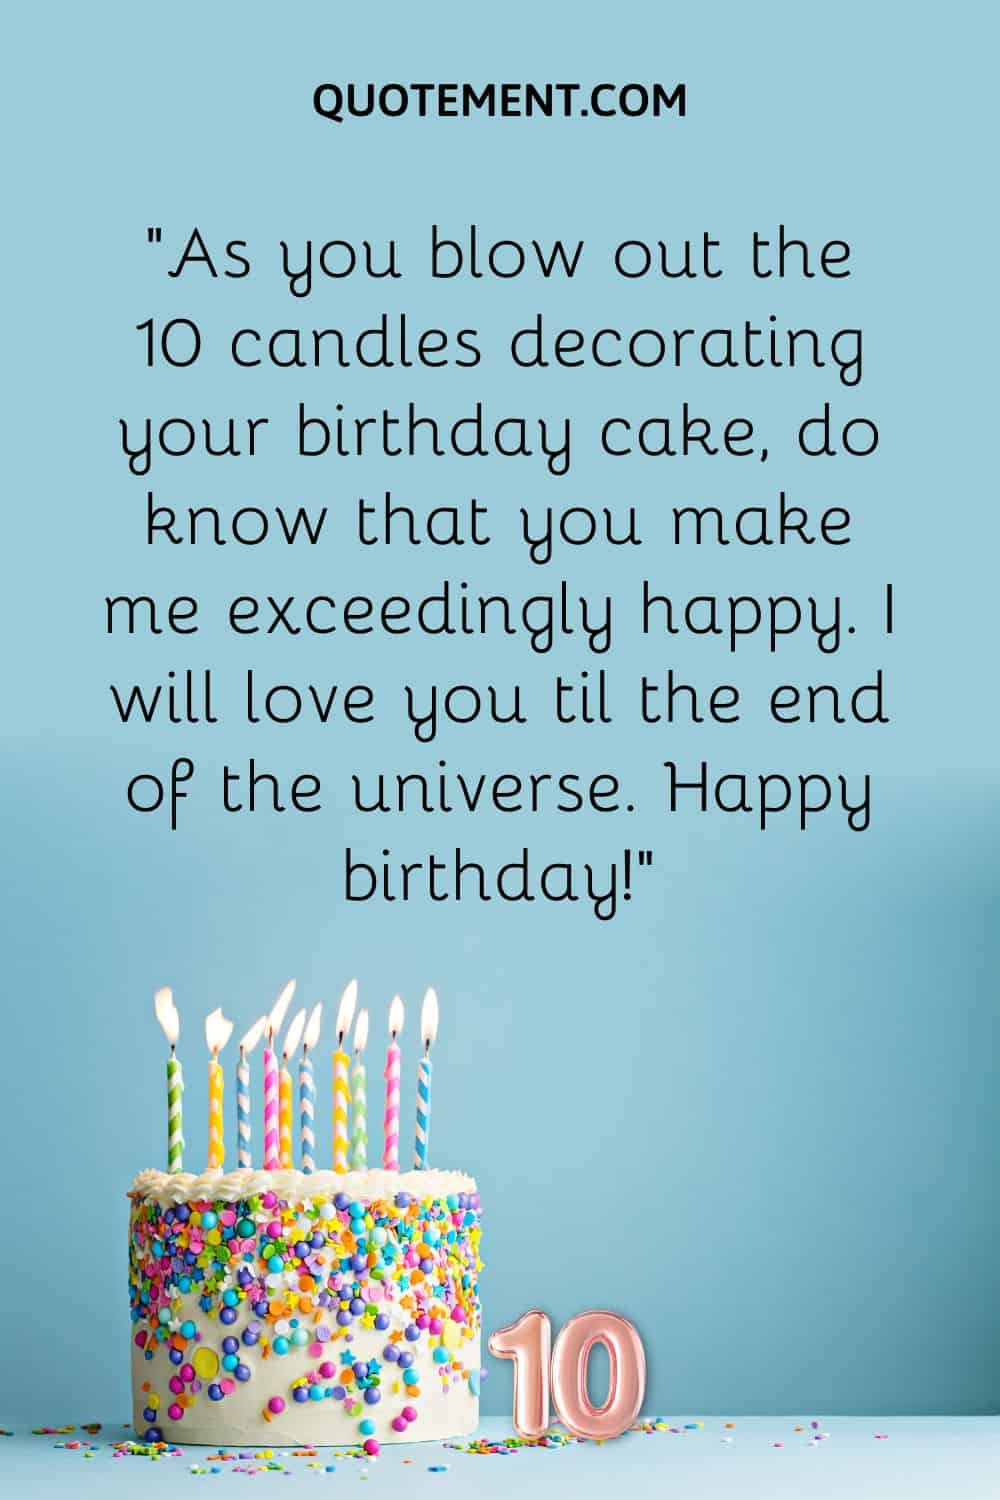 “As you blow out the 10 candles decorating your birthday cake, do know that you make me exceedingly happy. I will love you til the end of the universe. Happy birthday!”